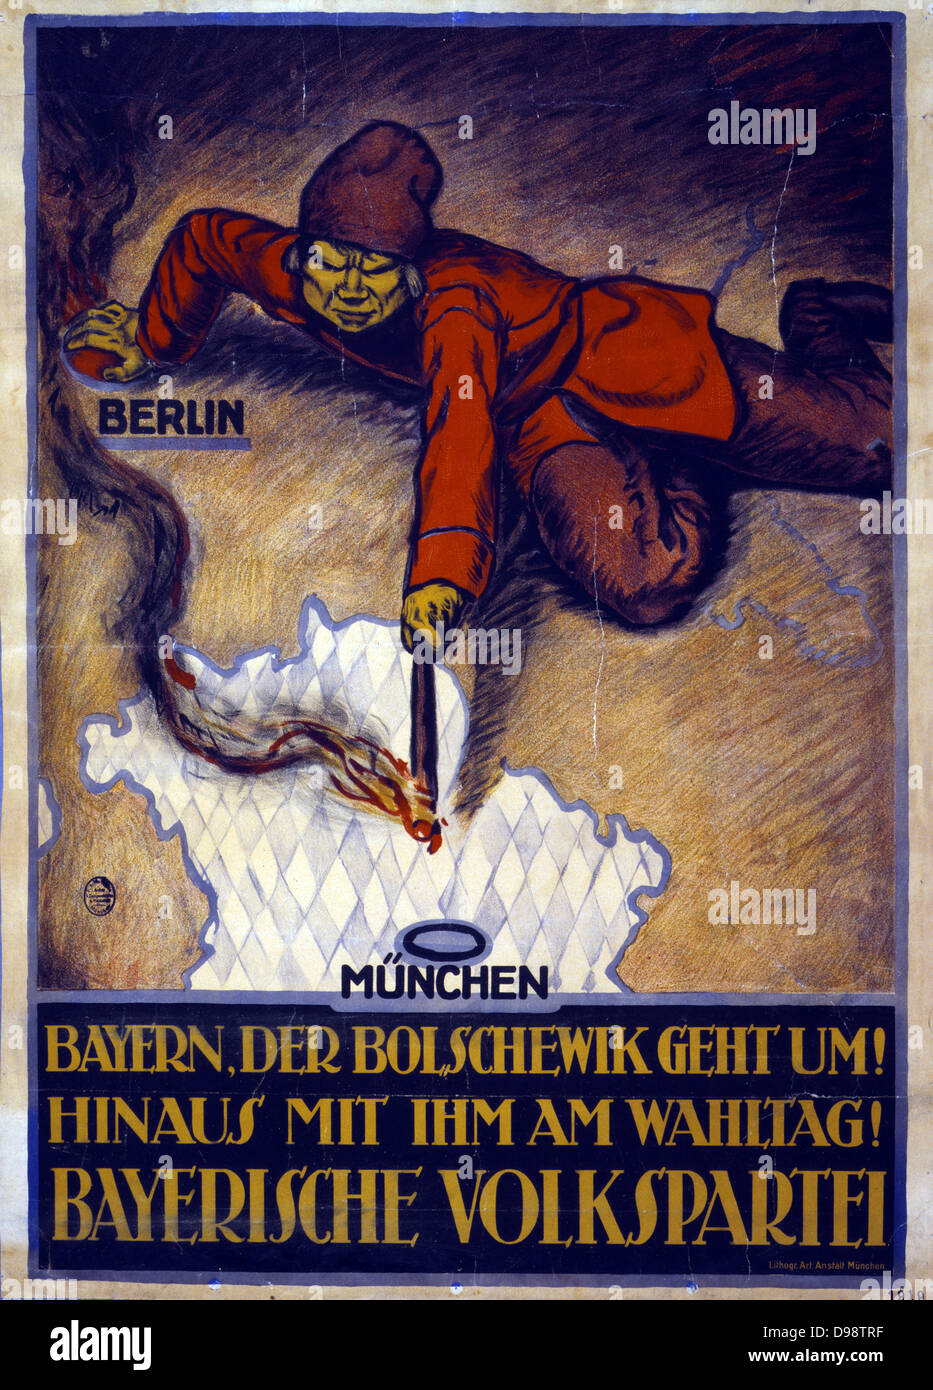 Bolshevik leaning across map of Europe and setting fire to Bavaria. 'The Bolshevik is coming! Throw him out on Election Day!' Bavarian People's Party poster, 1919, the year of the Communist Spartacus riots in Germany. Stock Photo